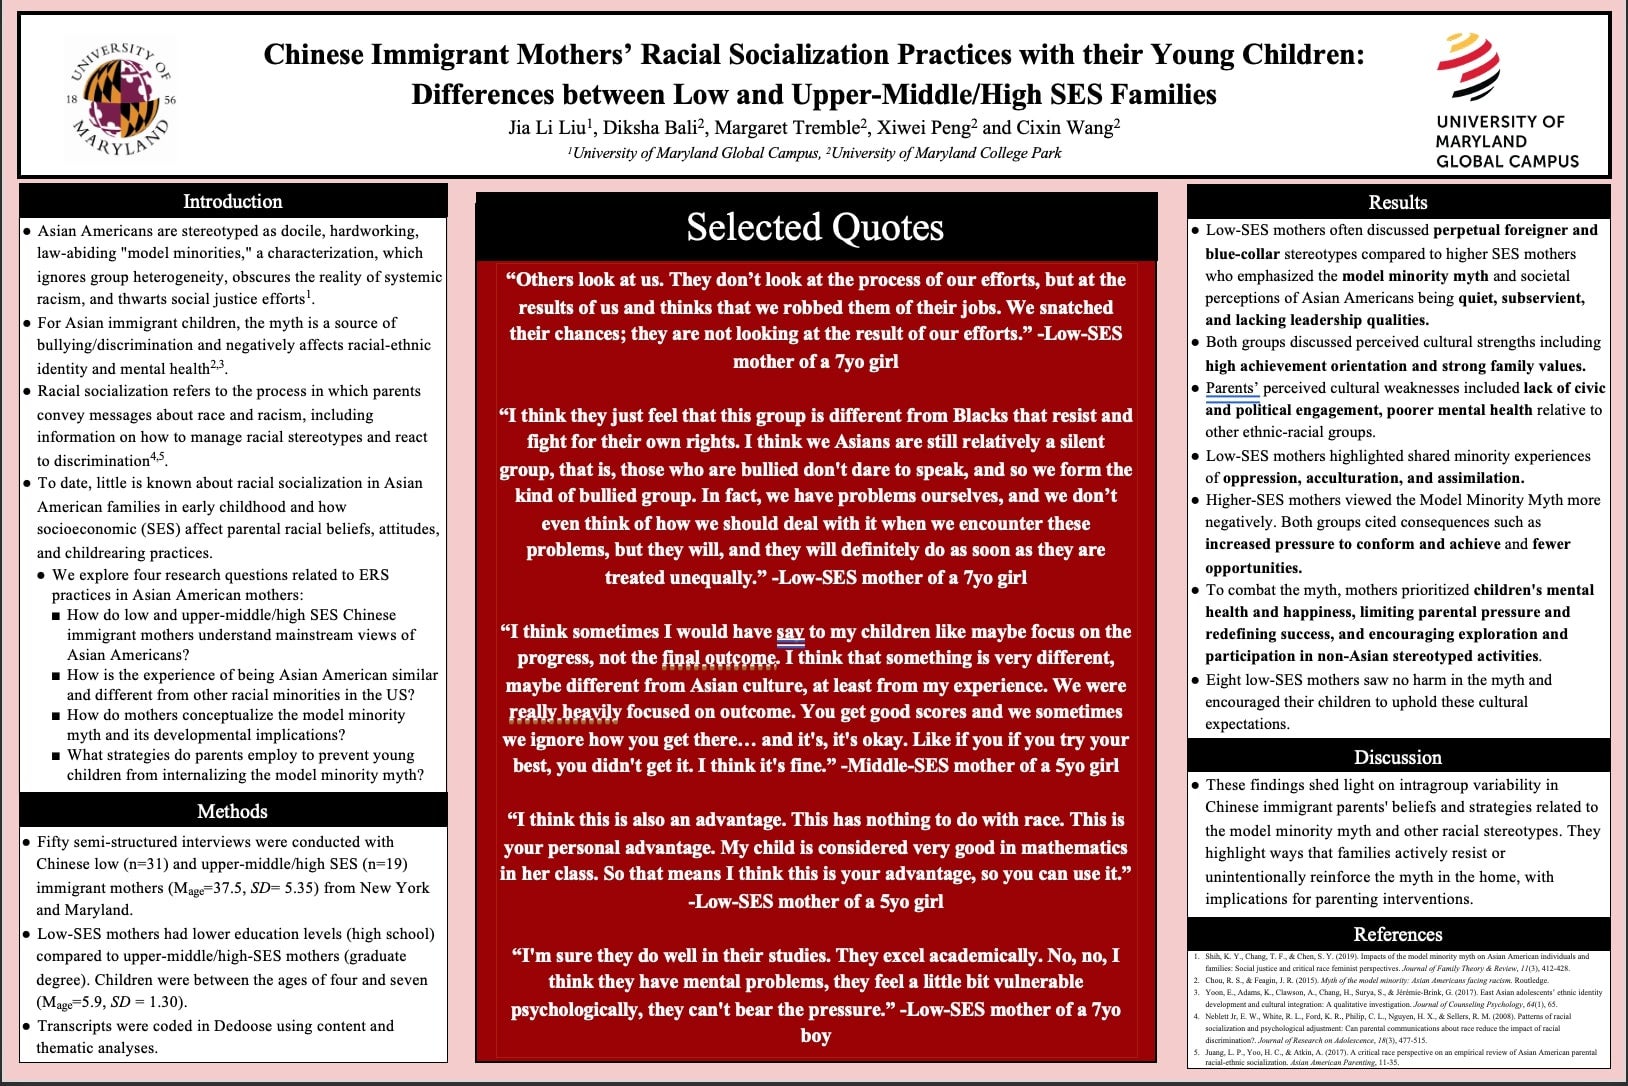 Chinese Immigrant Mothers’ Racial Socialization Practices with their Young Children.jpg